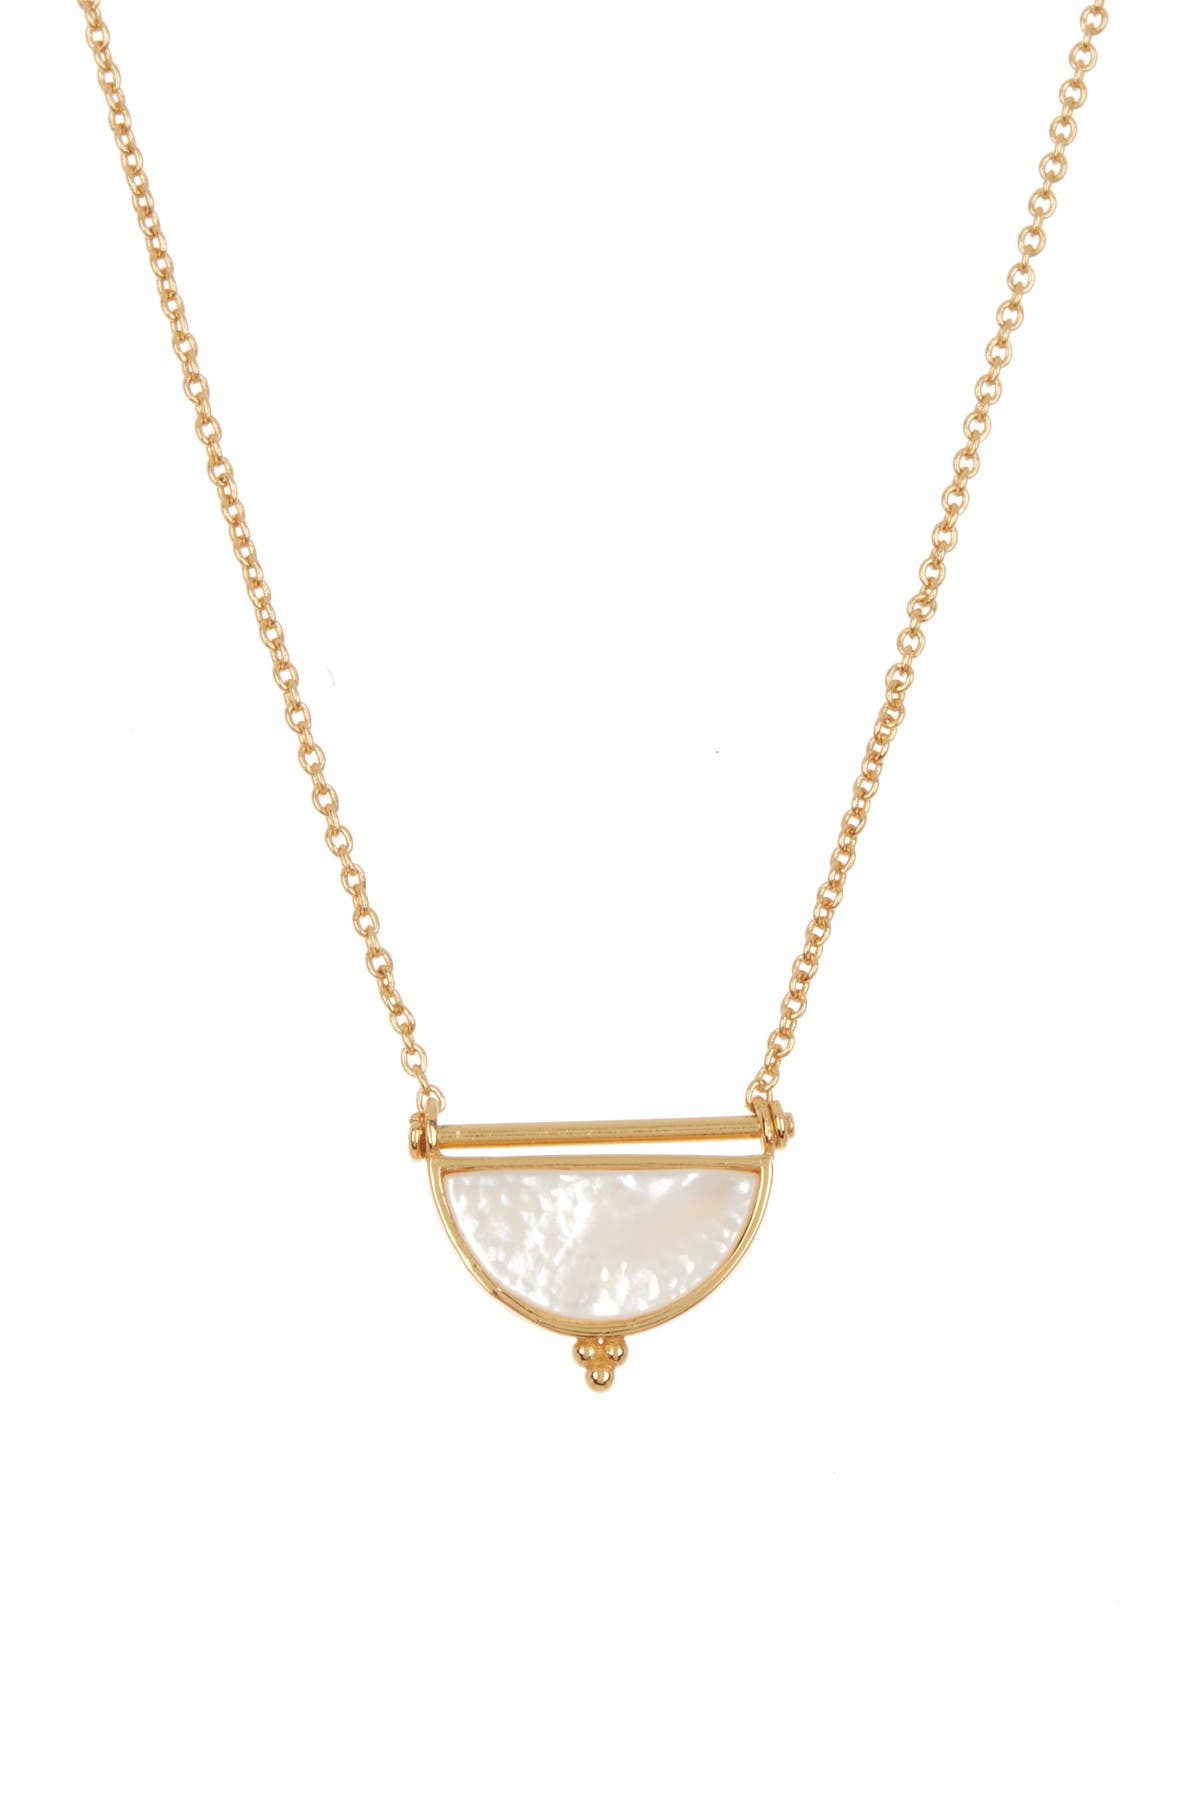 gold plated chain hammered pendant necklace silver gold plated pendant necklace necklace gold necklace Silver gold plated necklace